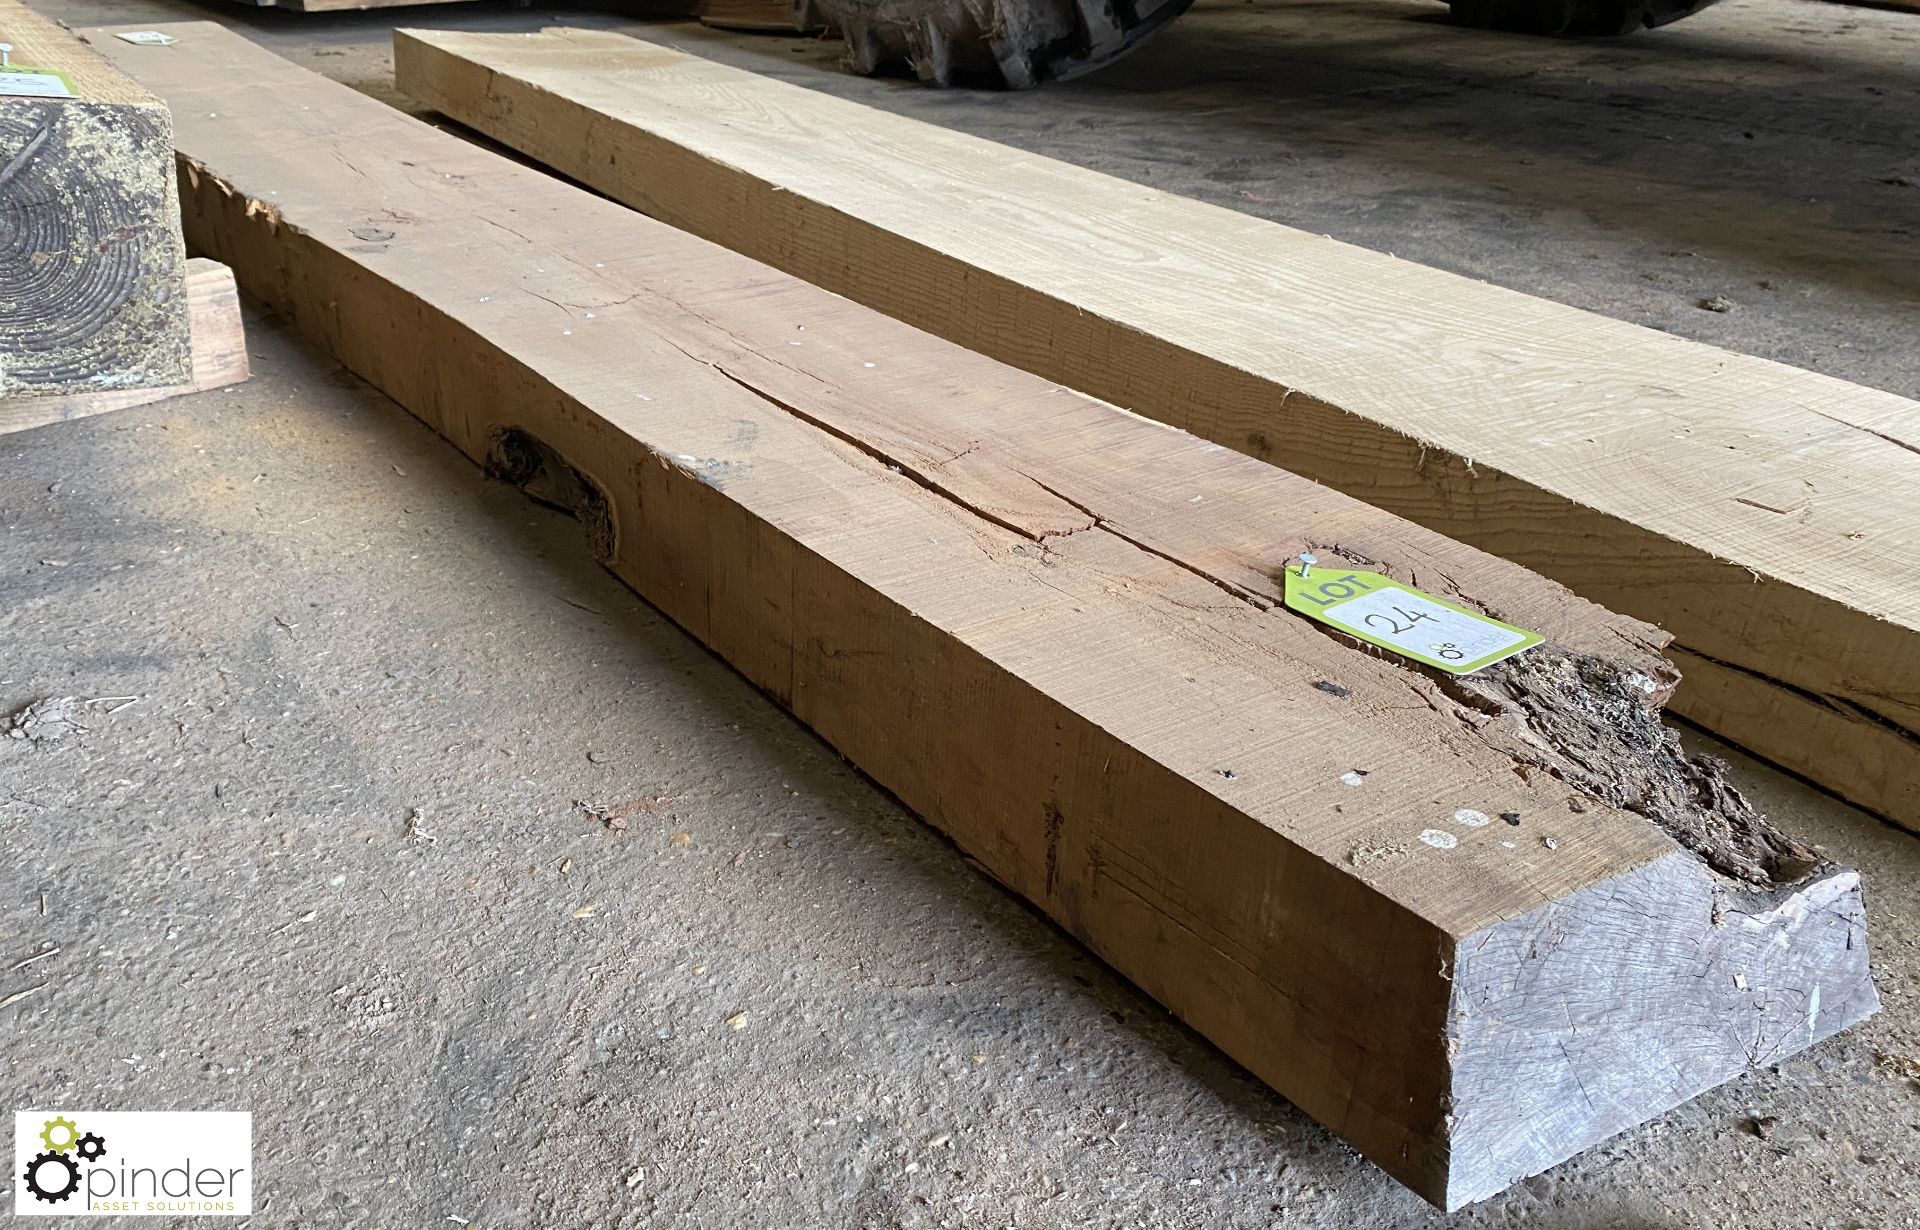 Air dried Yew Board, 2530mm x 285mm x 100mm - Image 6 of 7